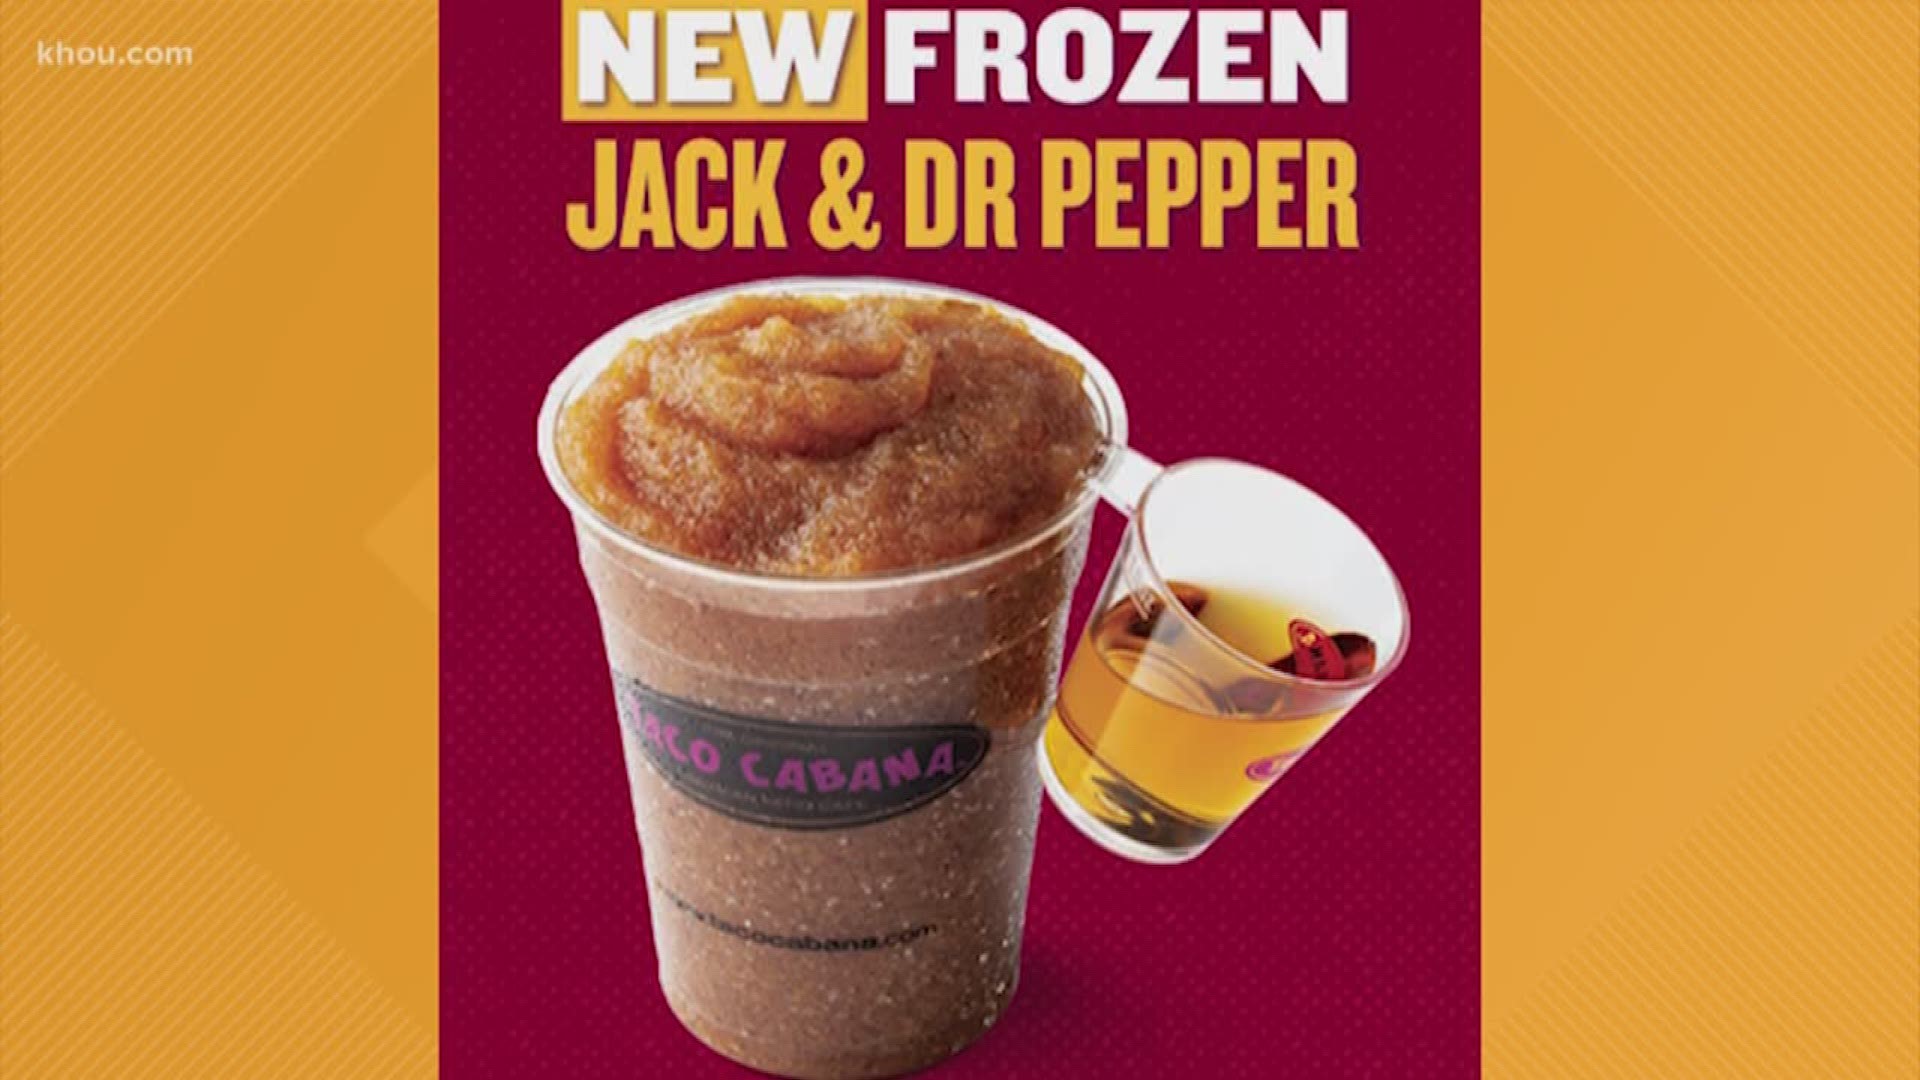 If you're 21 and over and looking to start your July off on the stronger side, Taco Cabana has a new menu item to kick off the month. You've probably heard of 'Jack and Coke,' but what about a frozen 'Jack and Dr. Pepper'? Well, the food chain is serving up exactly that! Starting Monday July 1, you can drop a few dollars on the alcoholic drink.